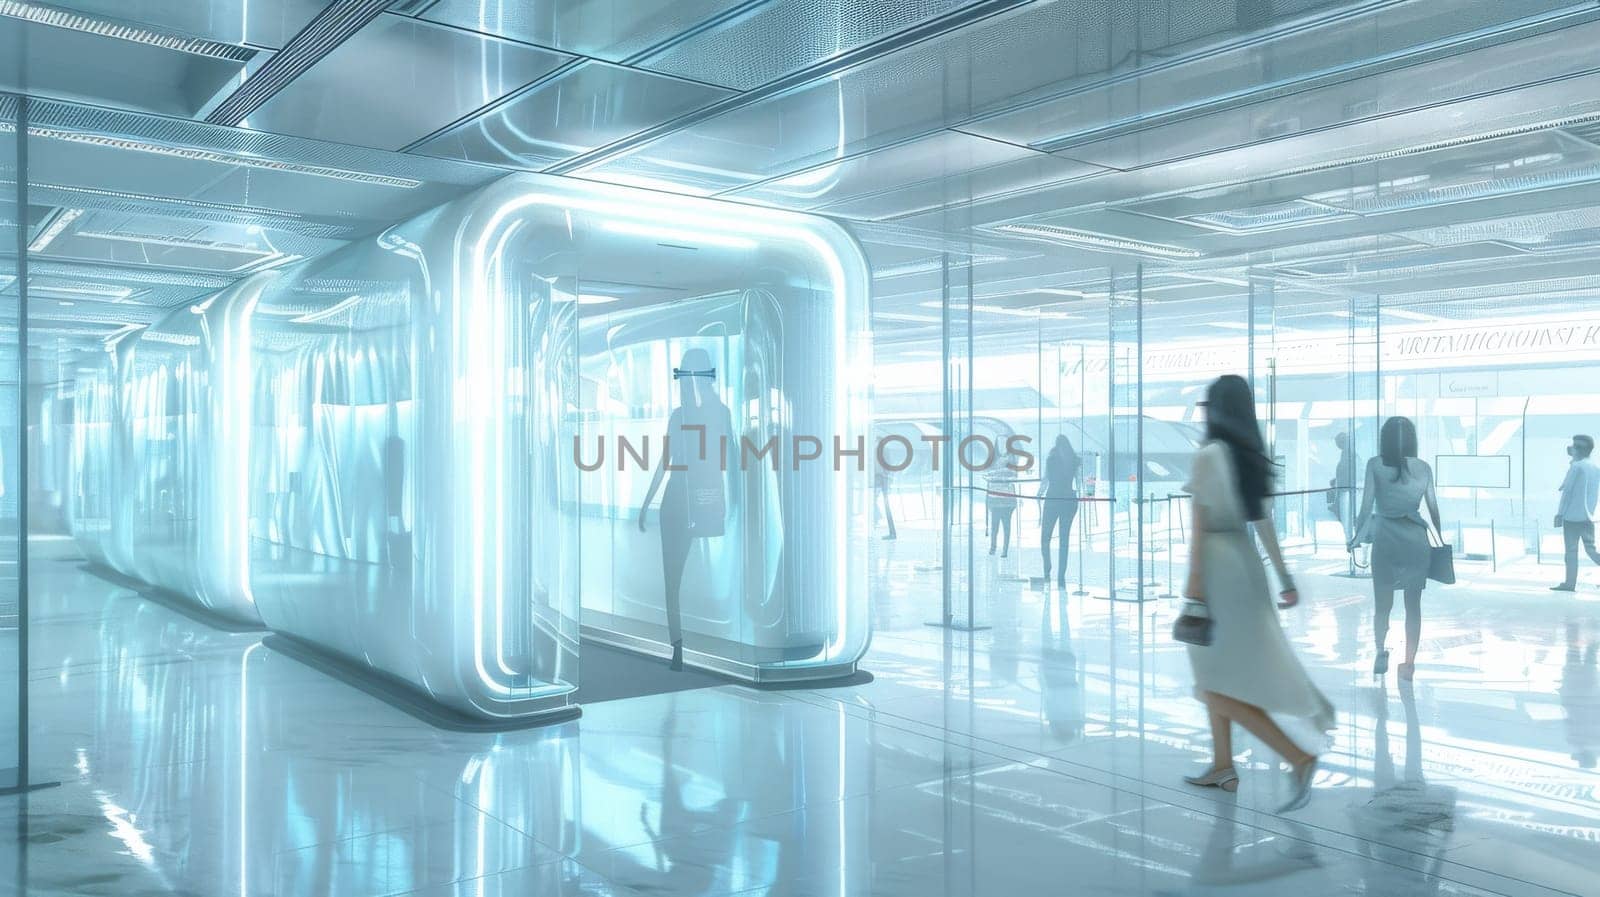 A group of people are walking through a large, brightly lit room. futuristic technology by itchaznong